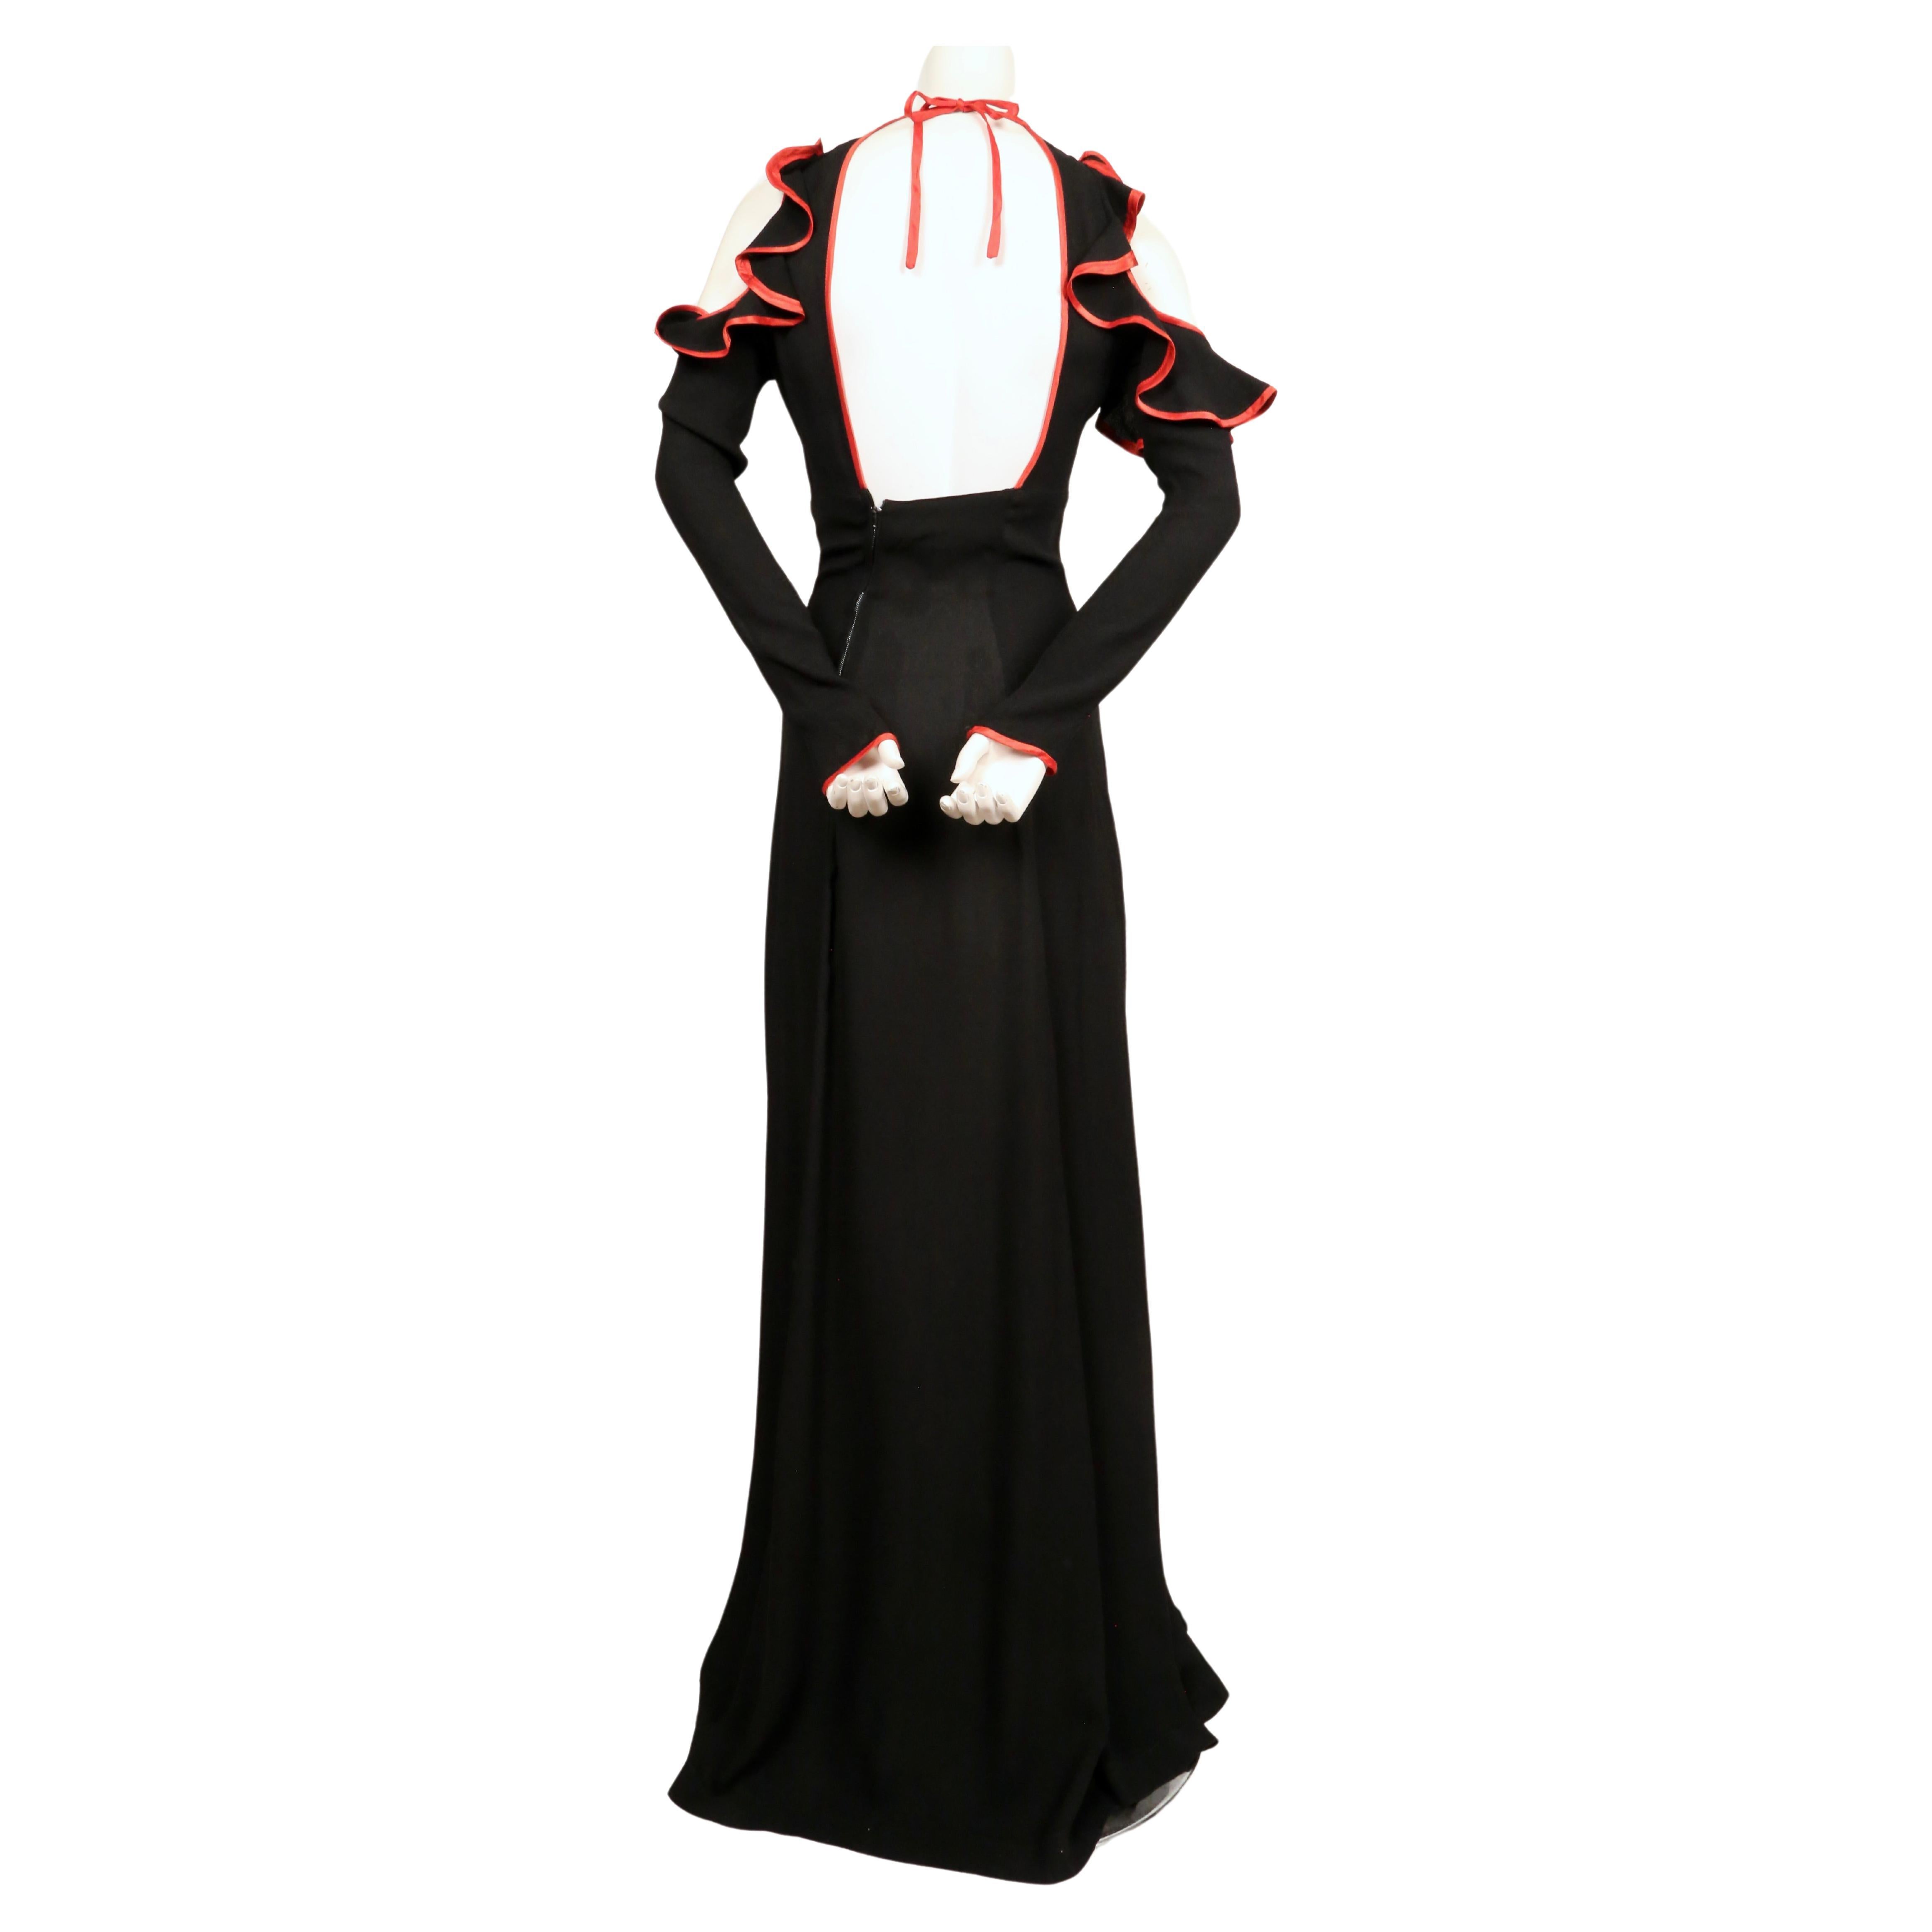 1968 OSSIE CLARK black moss crepe dress with keyhole neckline ruffles & red trim For Sale 3